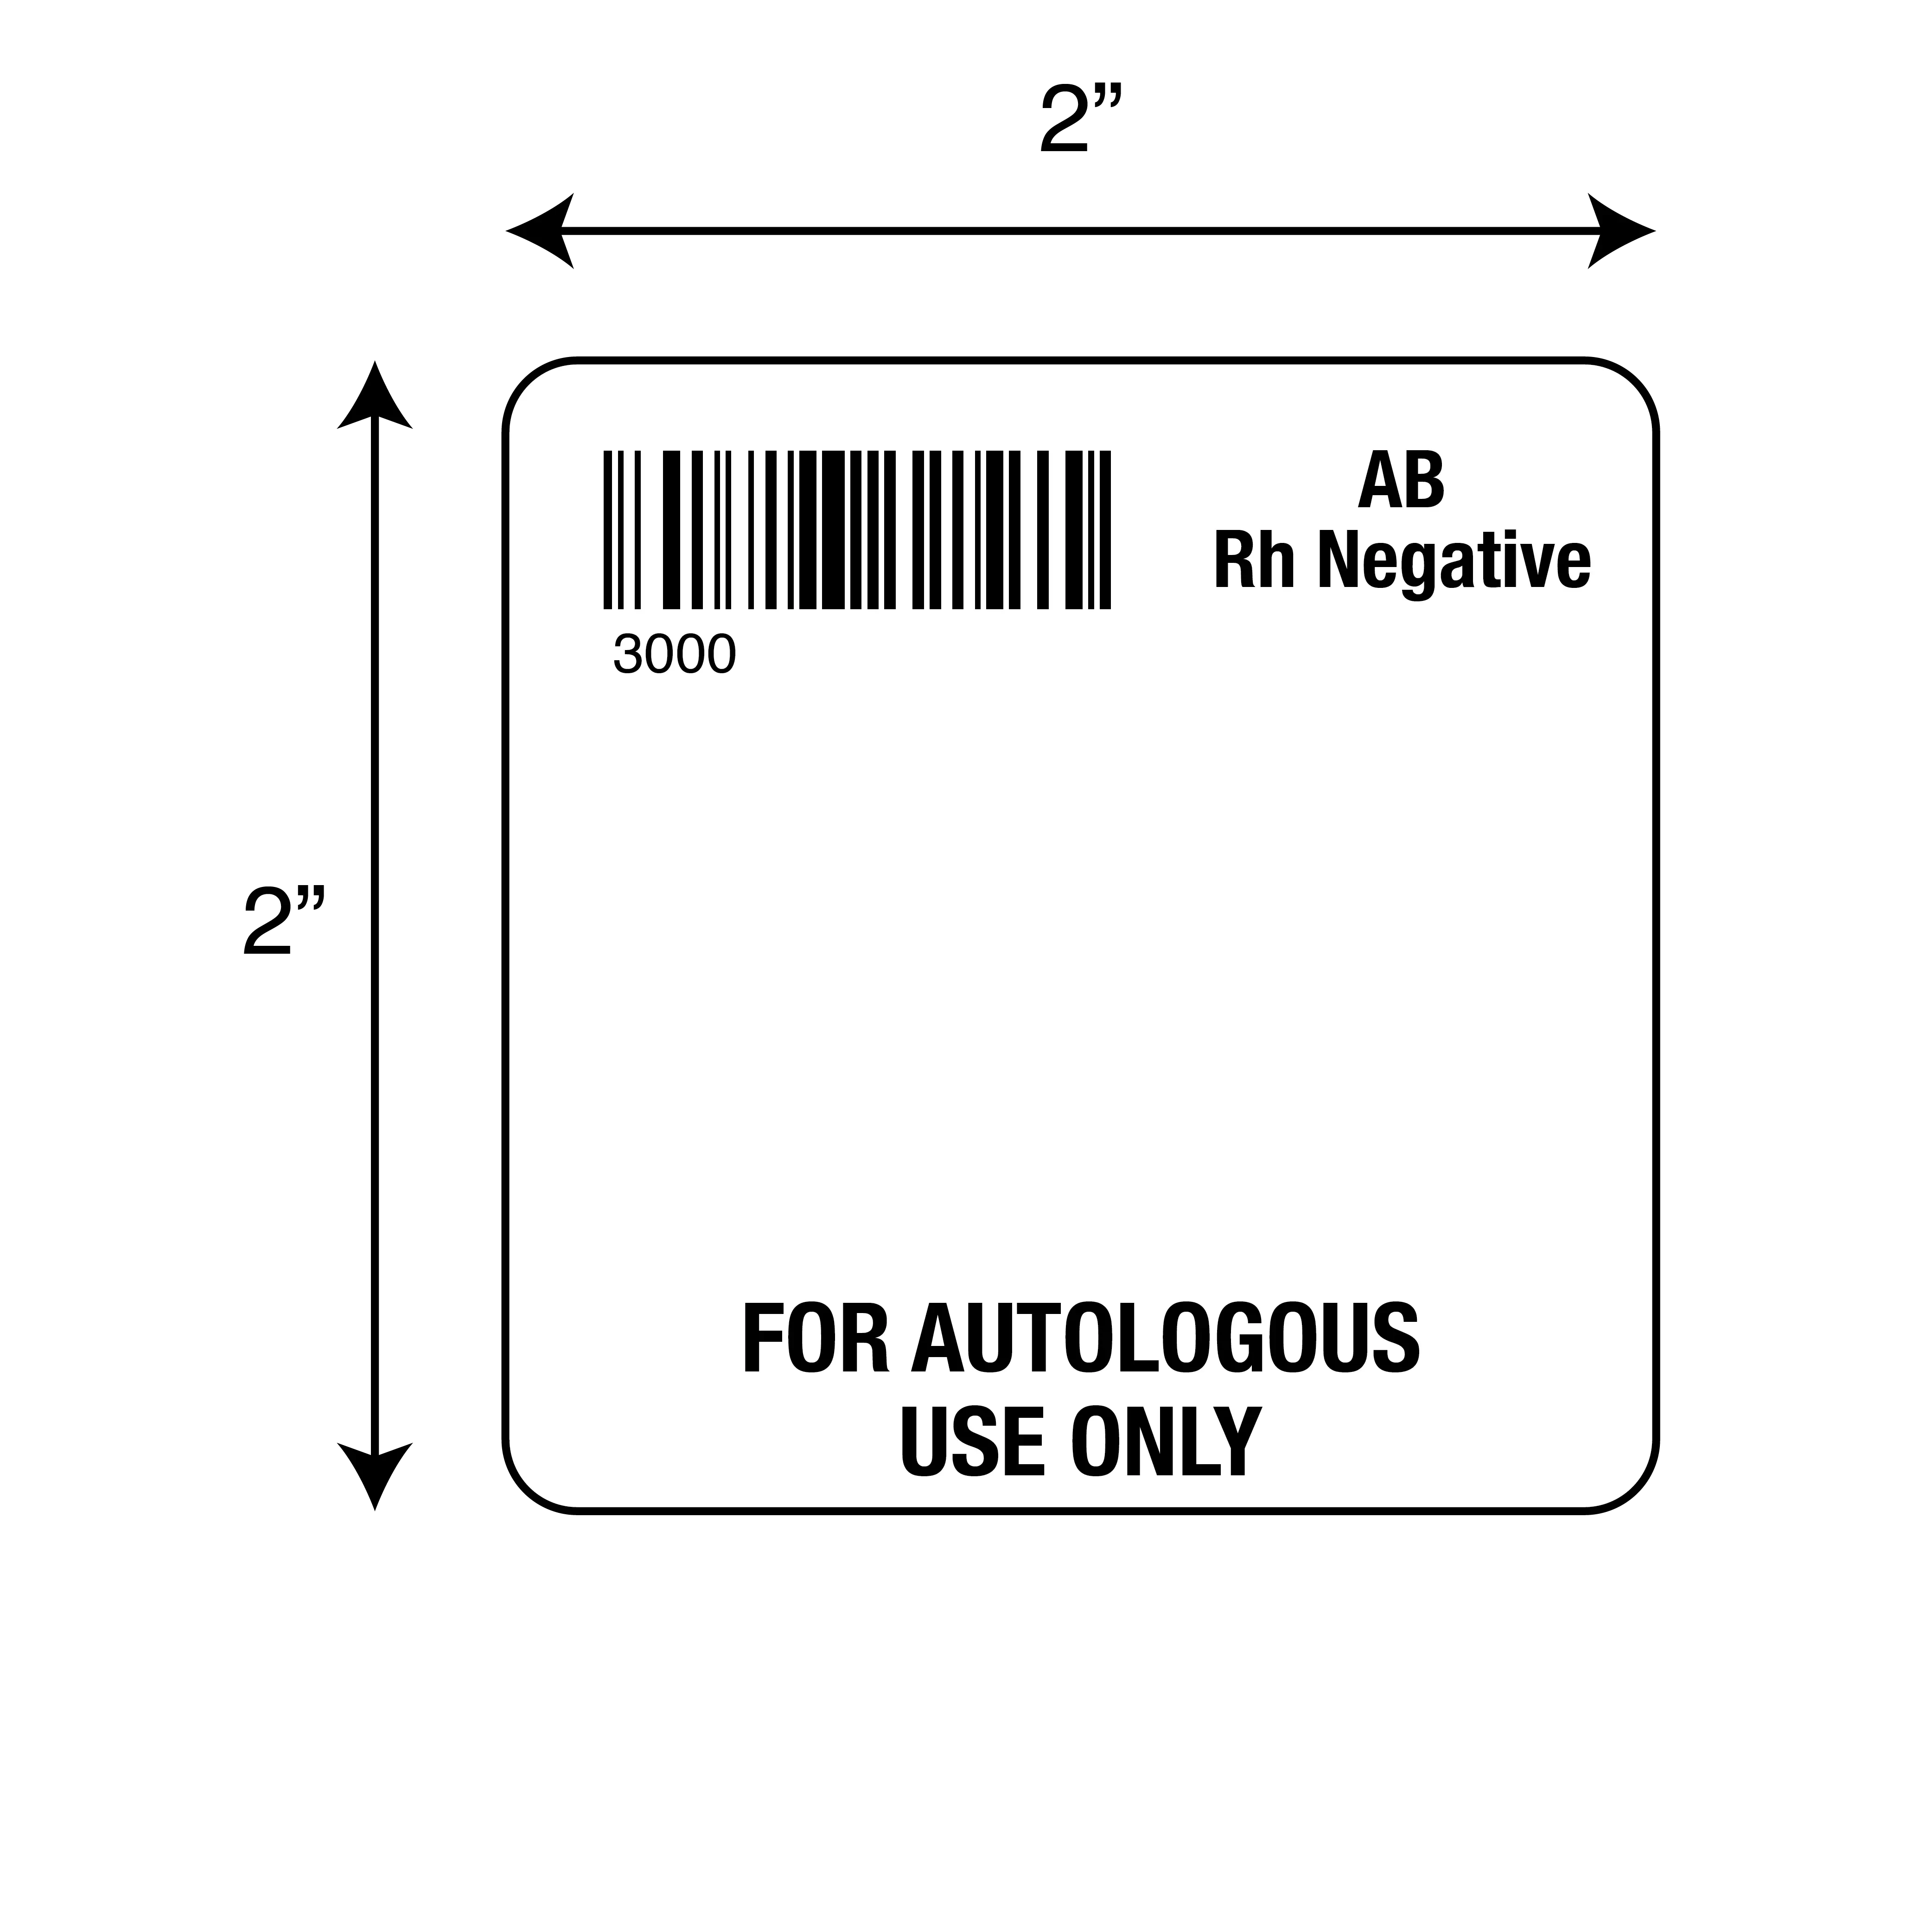 ISBT 128 AB Rh Negative For Autologous Use Only